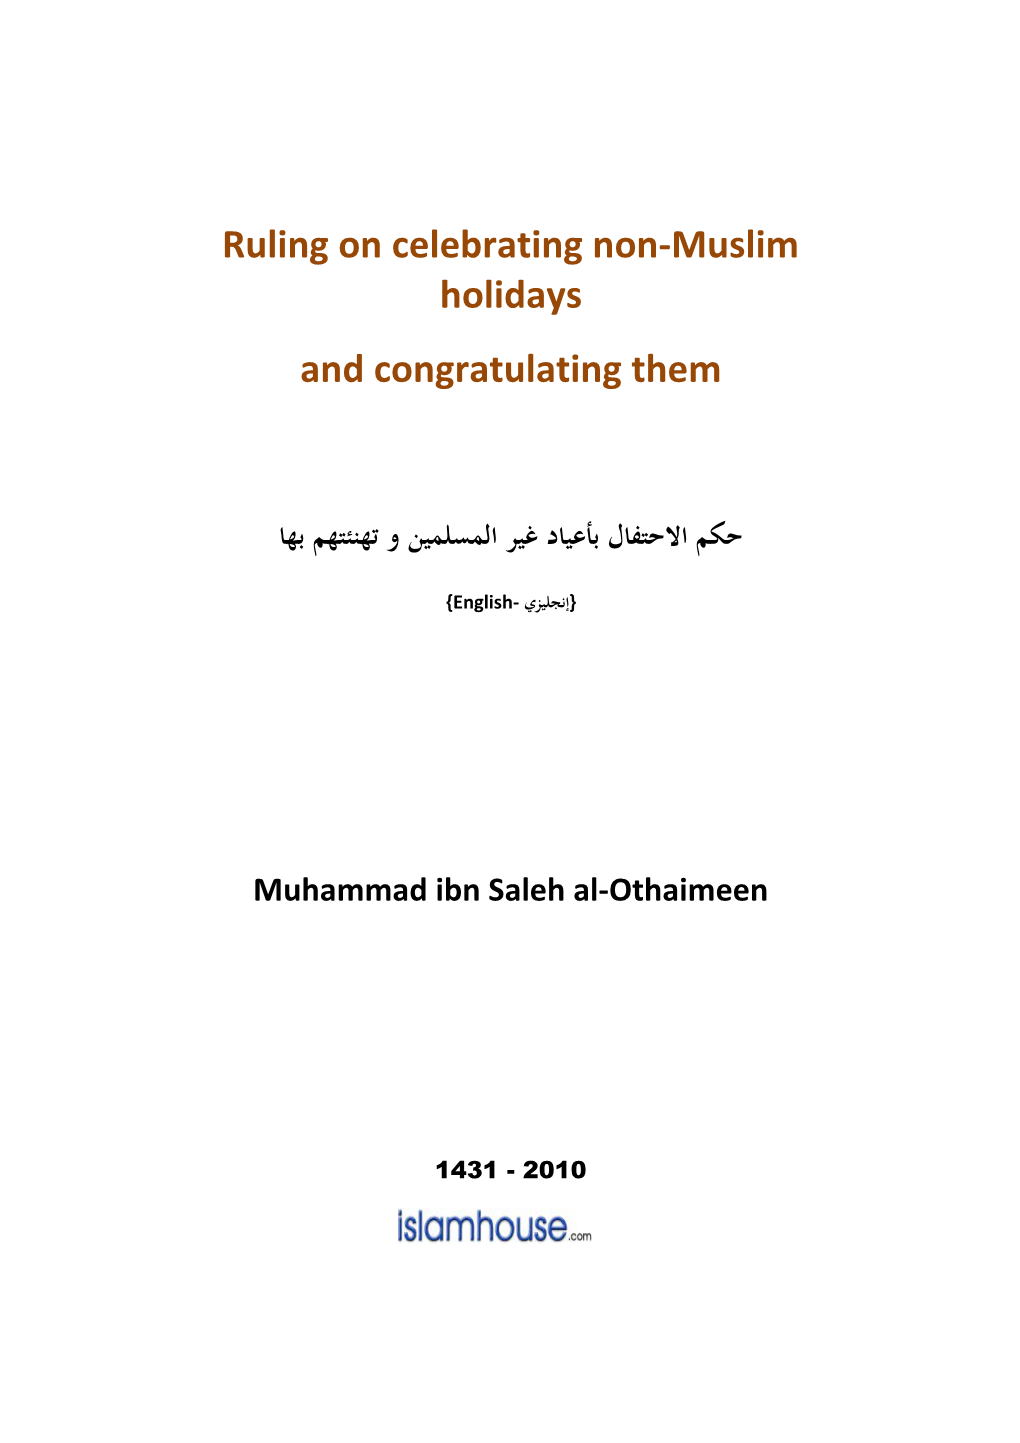 Ruling on Celebrating Non-Muslim Holidays and Congratulating Them